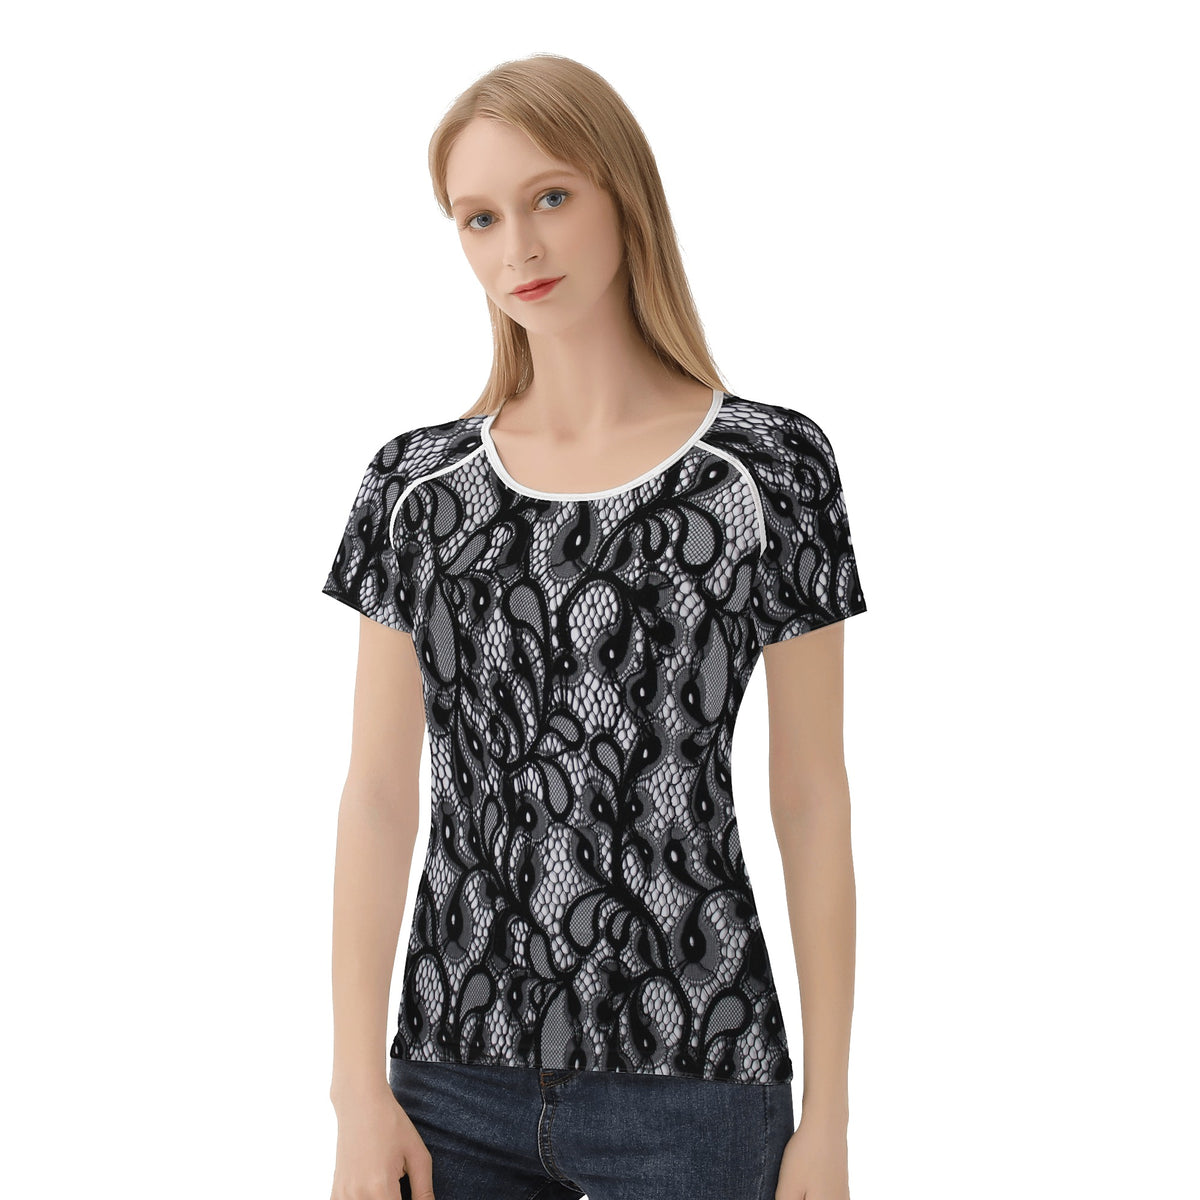 Womens All-Over Print T shirt